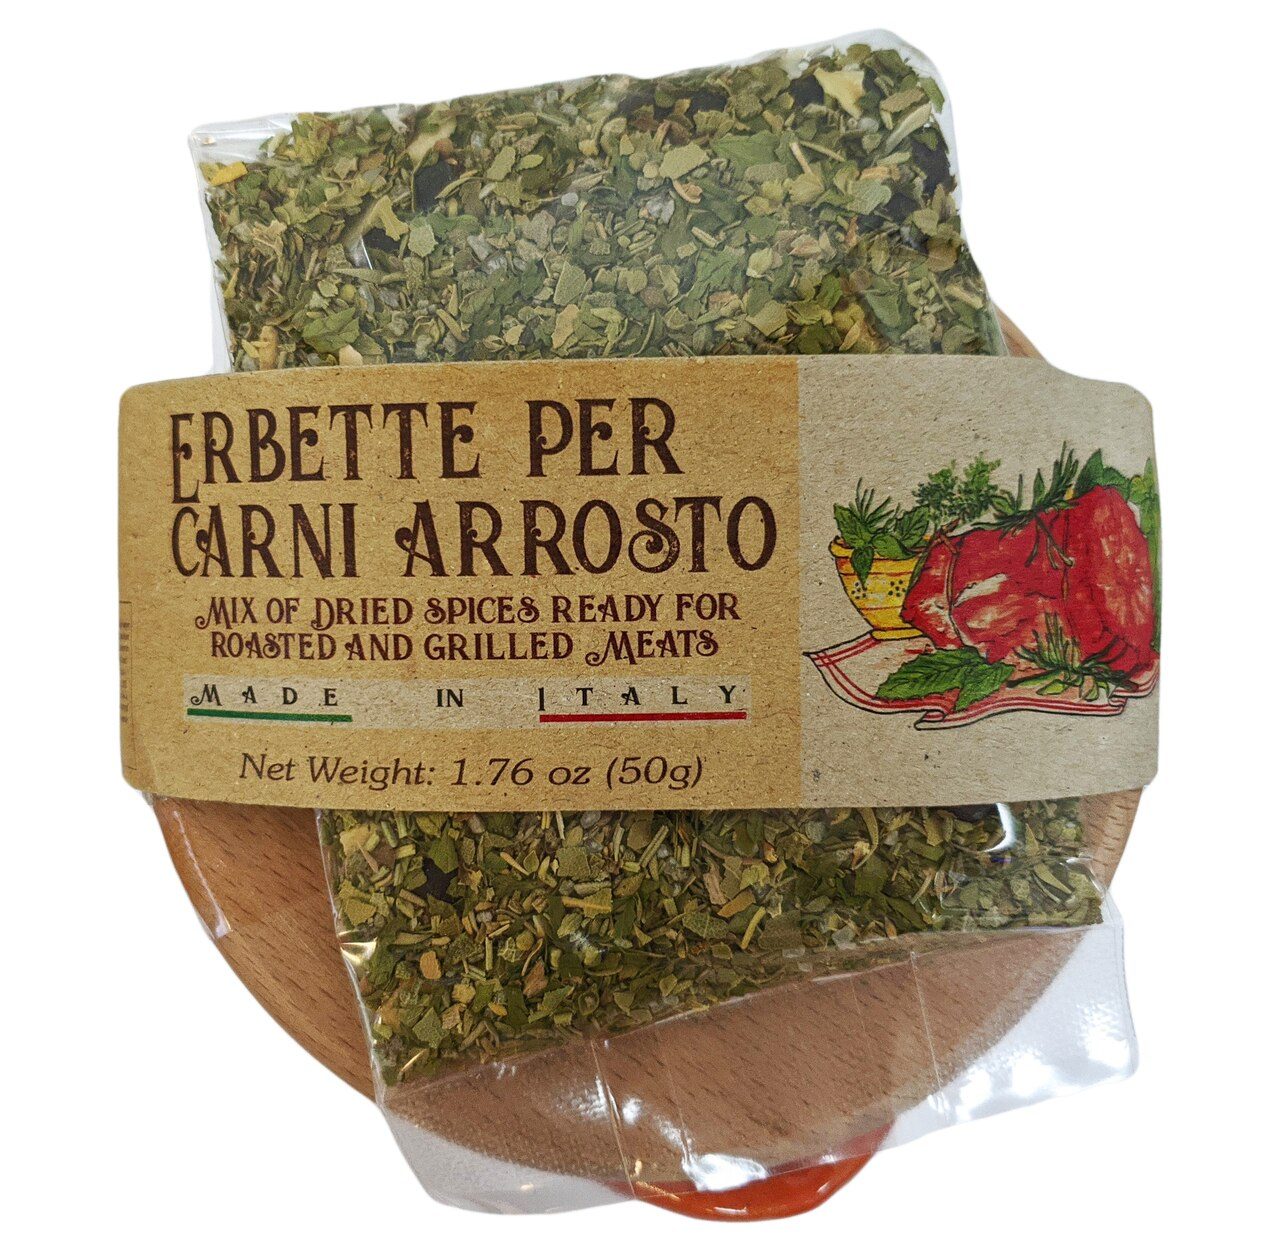 Casarecci Ricetta Spice Mix for Grilled Meat with Terracotta